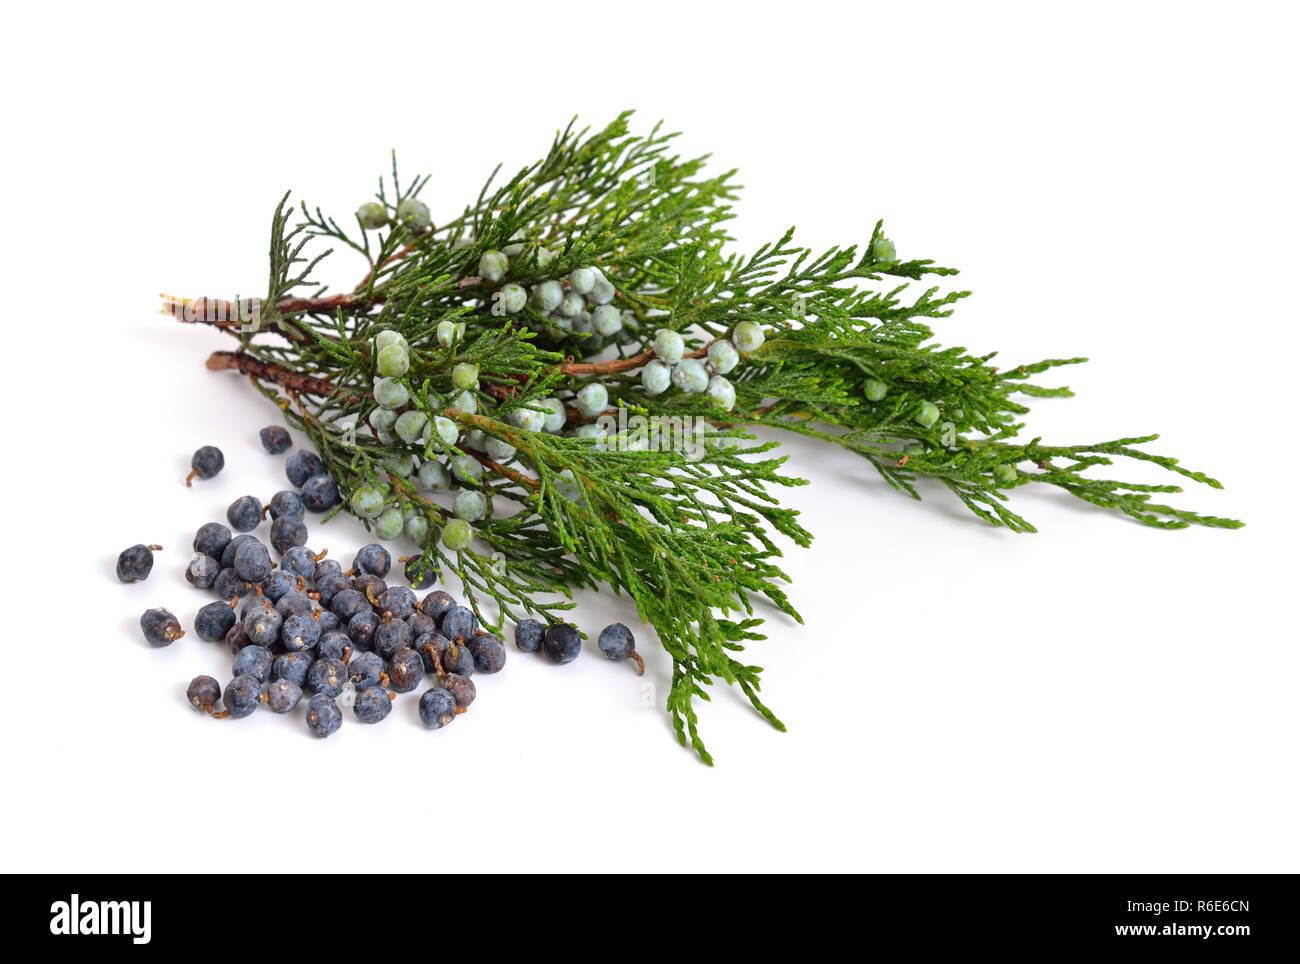 Juniperus sabina with green and ripe Cones (berries) isolated on white. Stock Photo